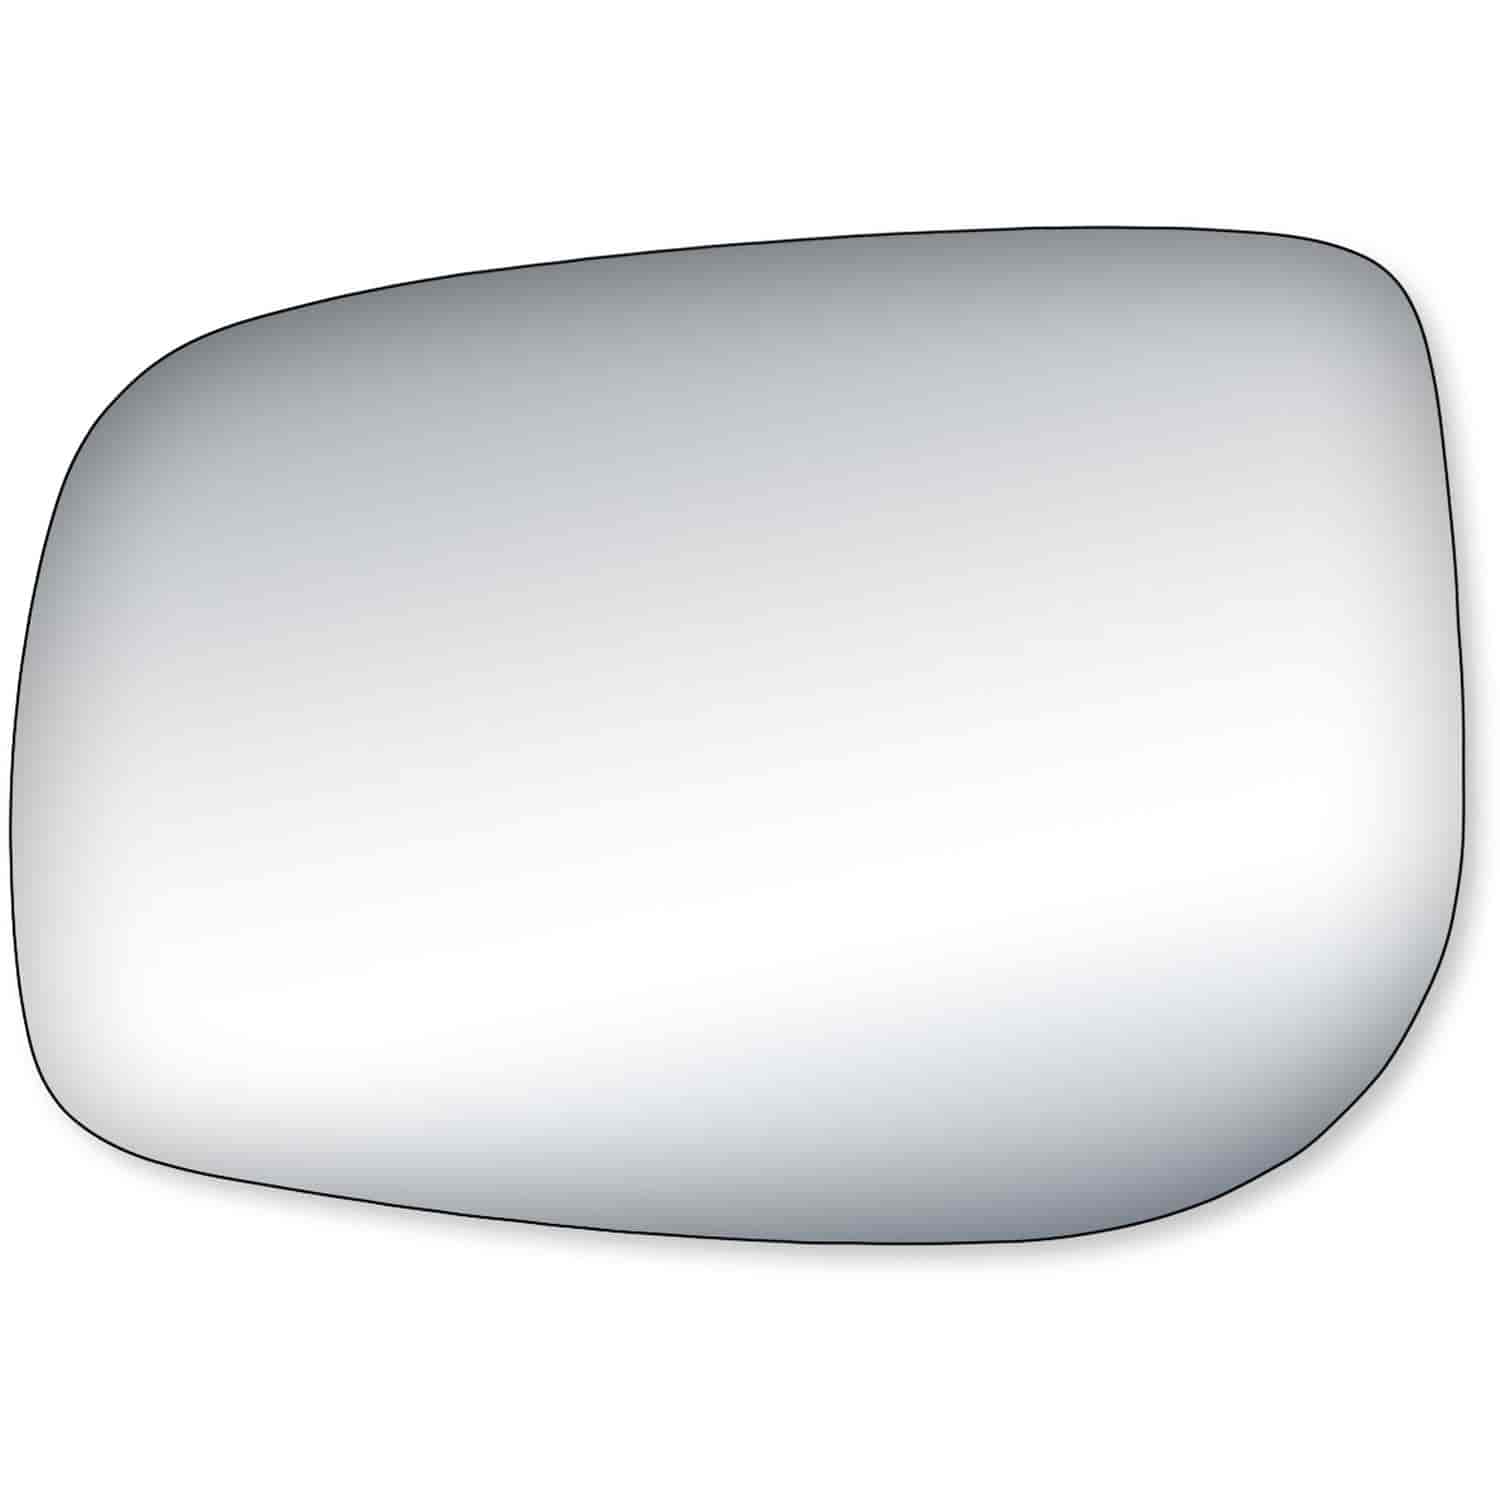 Replacement Glass for 07-12 Yaris Sedan; 07-11 Yaris Hatchback the glass measures 4 9/16 tall by 6 3